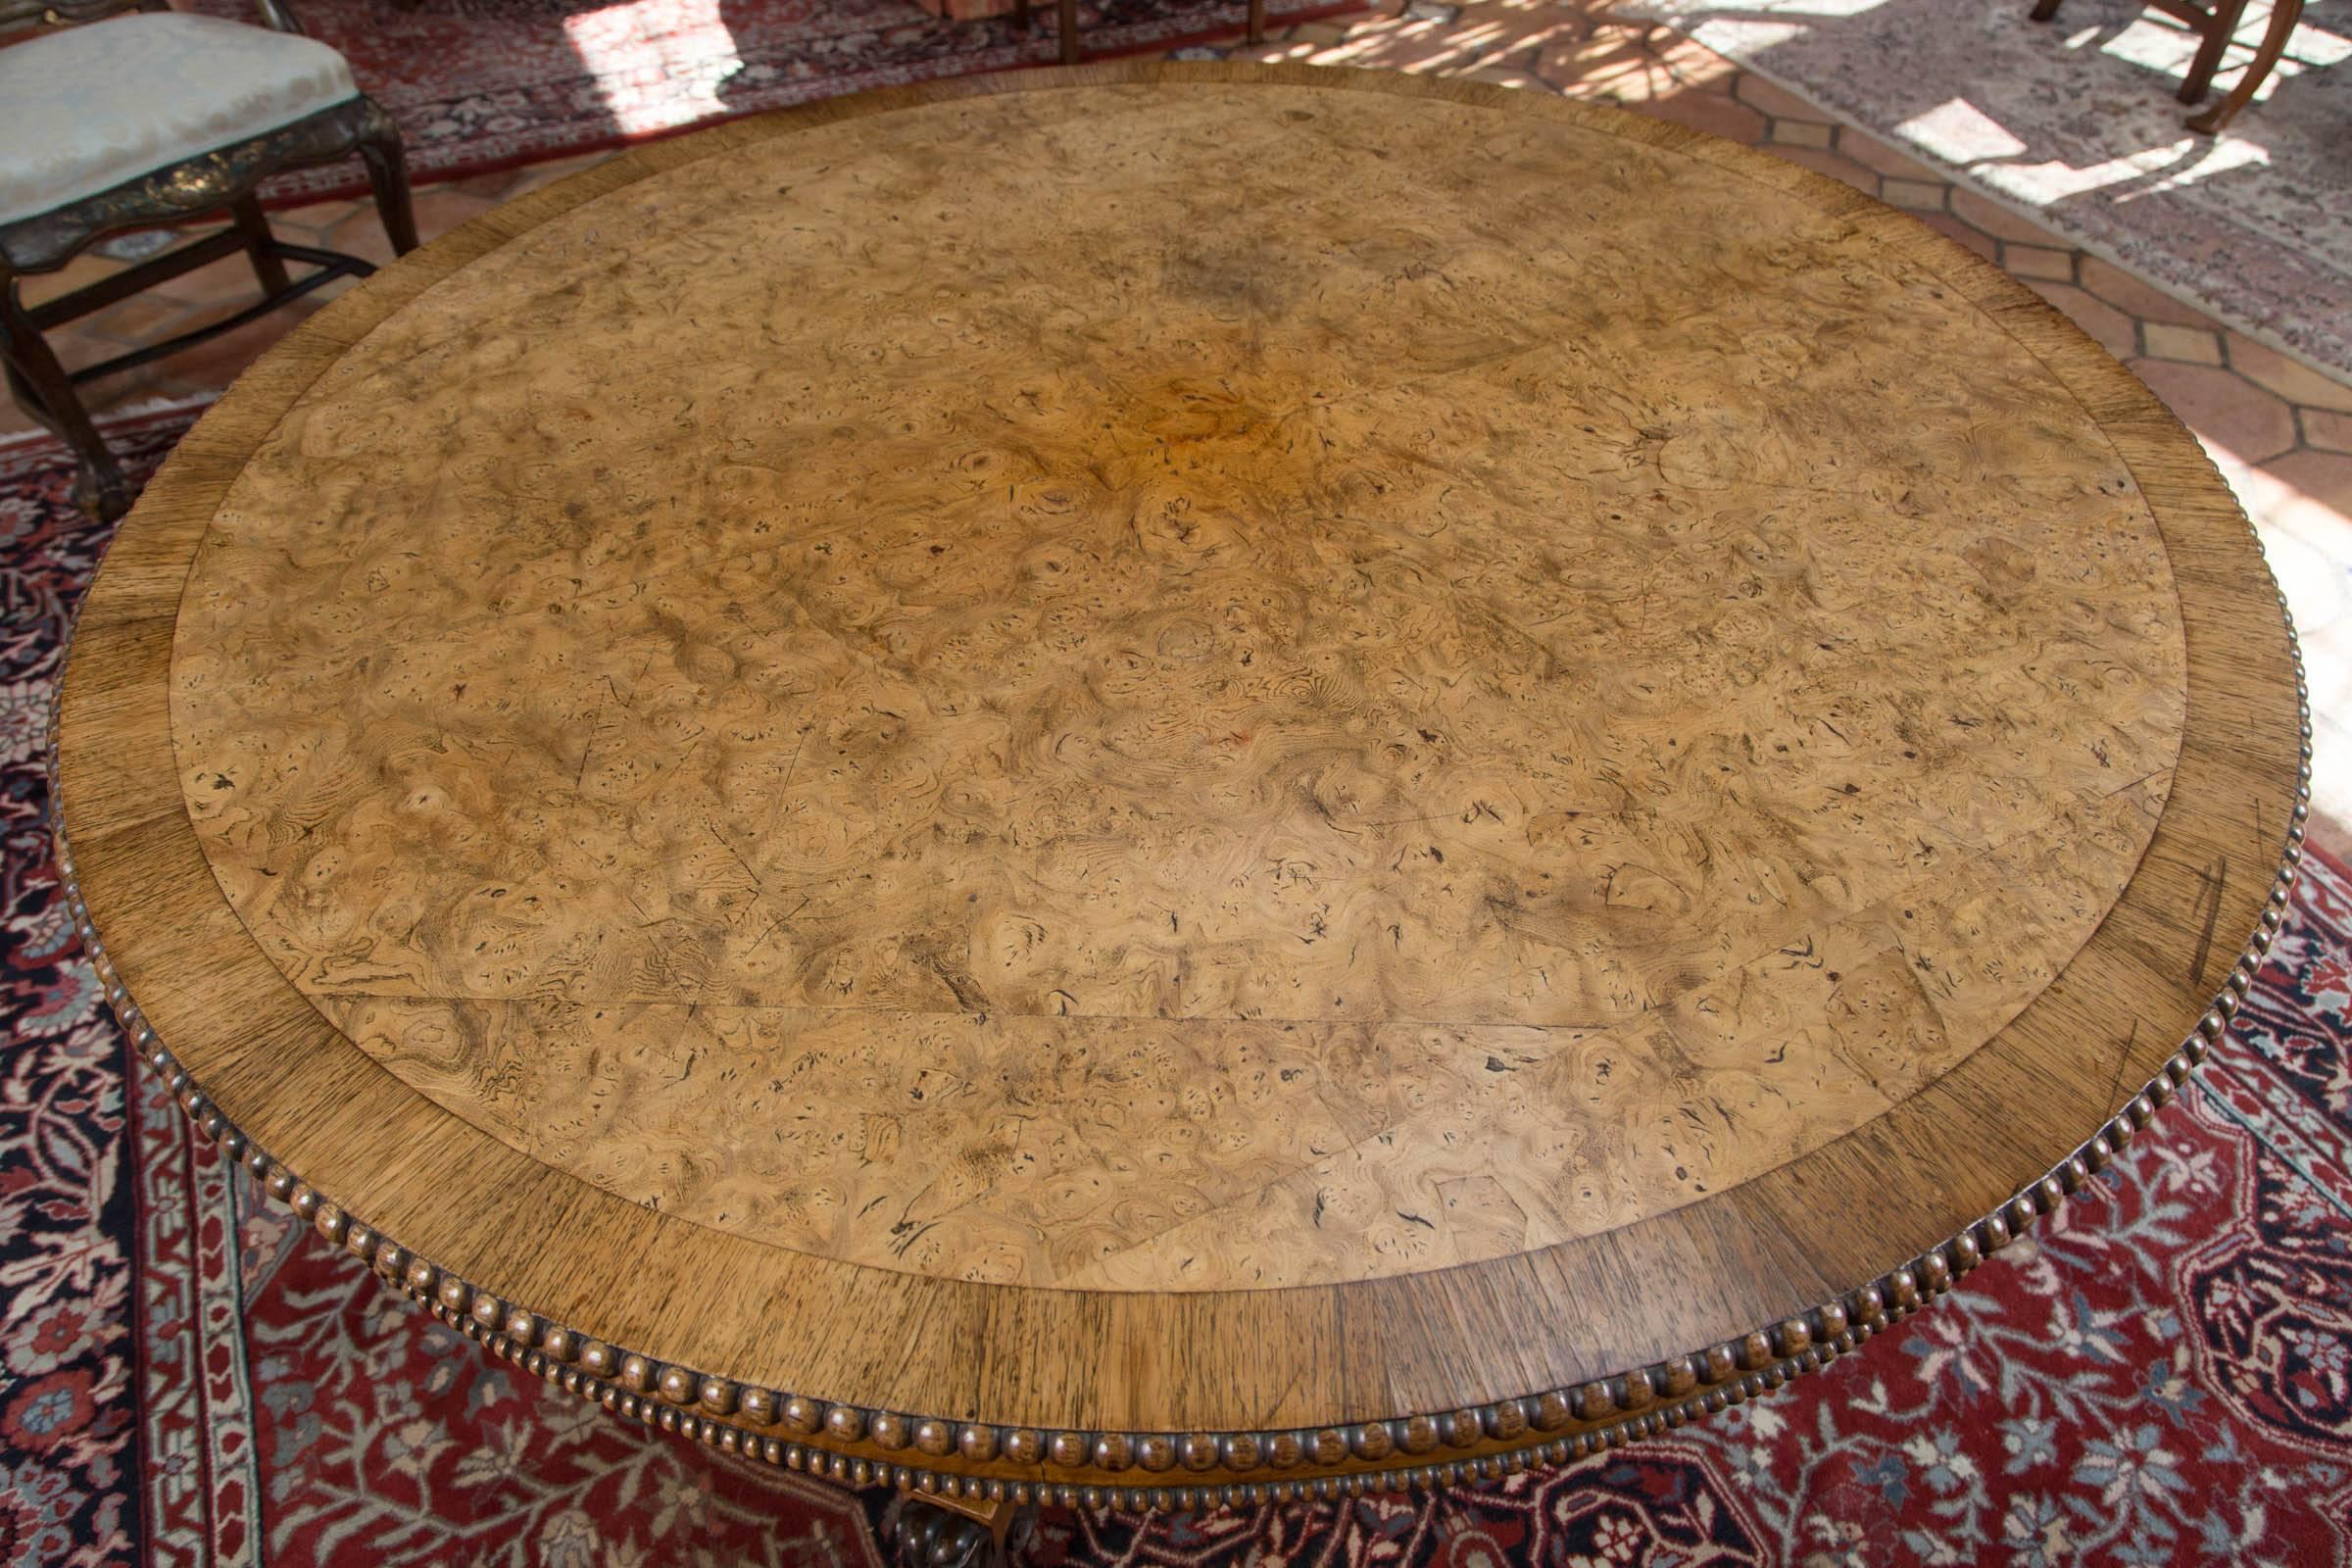 English Regency pollard oak centre table with oak crossbanding. Table features large beaded edge over apron with smaller beaded edge. Concave, four-sided column resting upon concave, four-legged platform base, ending with ebonized carved claw feet